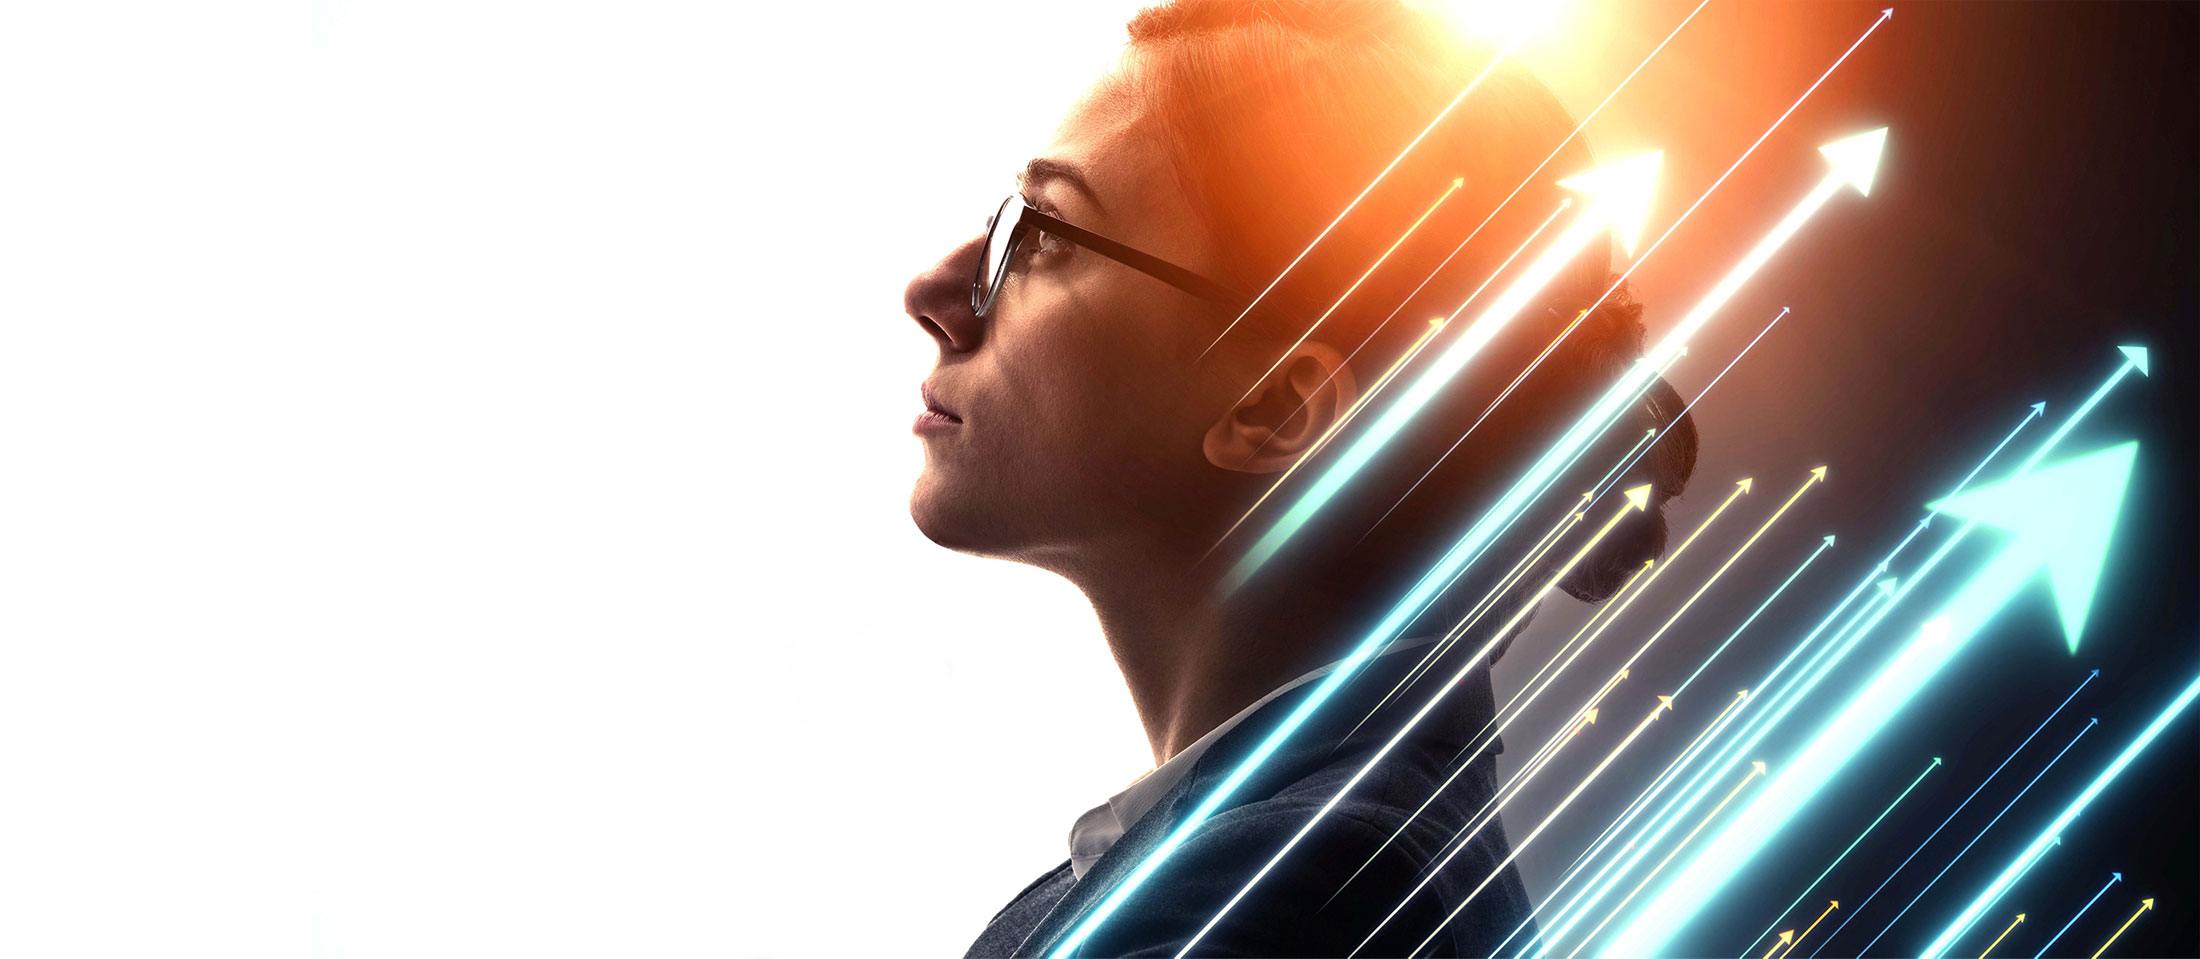 A profile of a professional looking woman looking up with arrow shaped light beams across her profile shooting upwards.